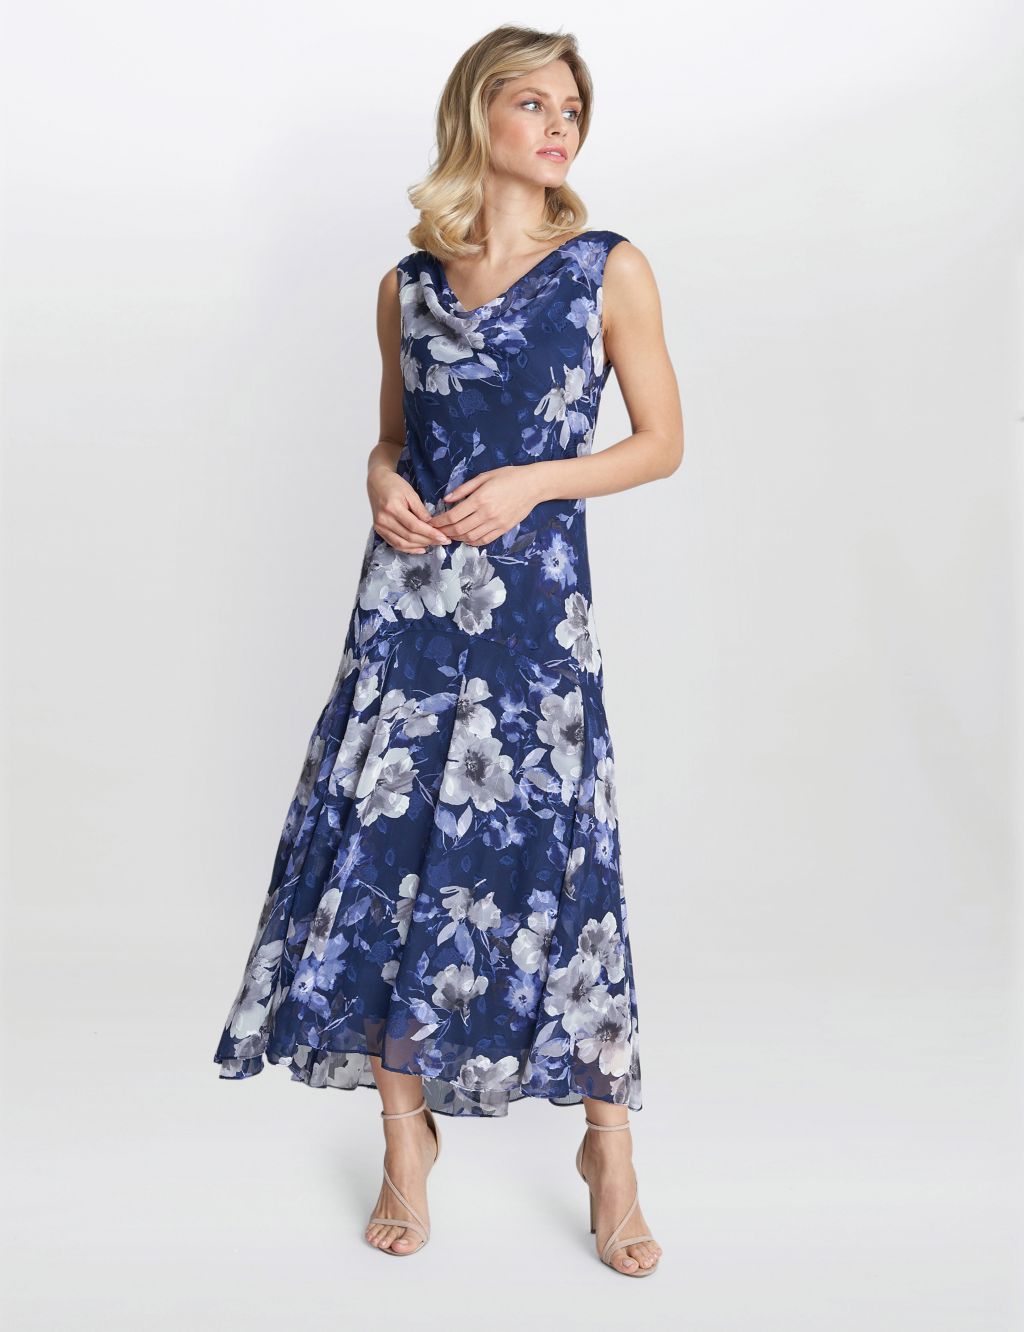 Floral Cowl Neck Maxi Swing Dress with Shawl image 4